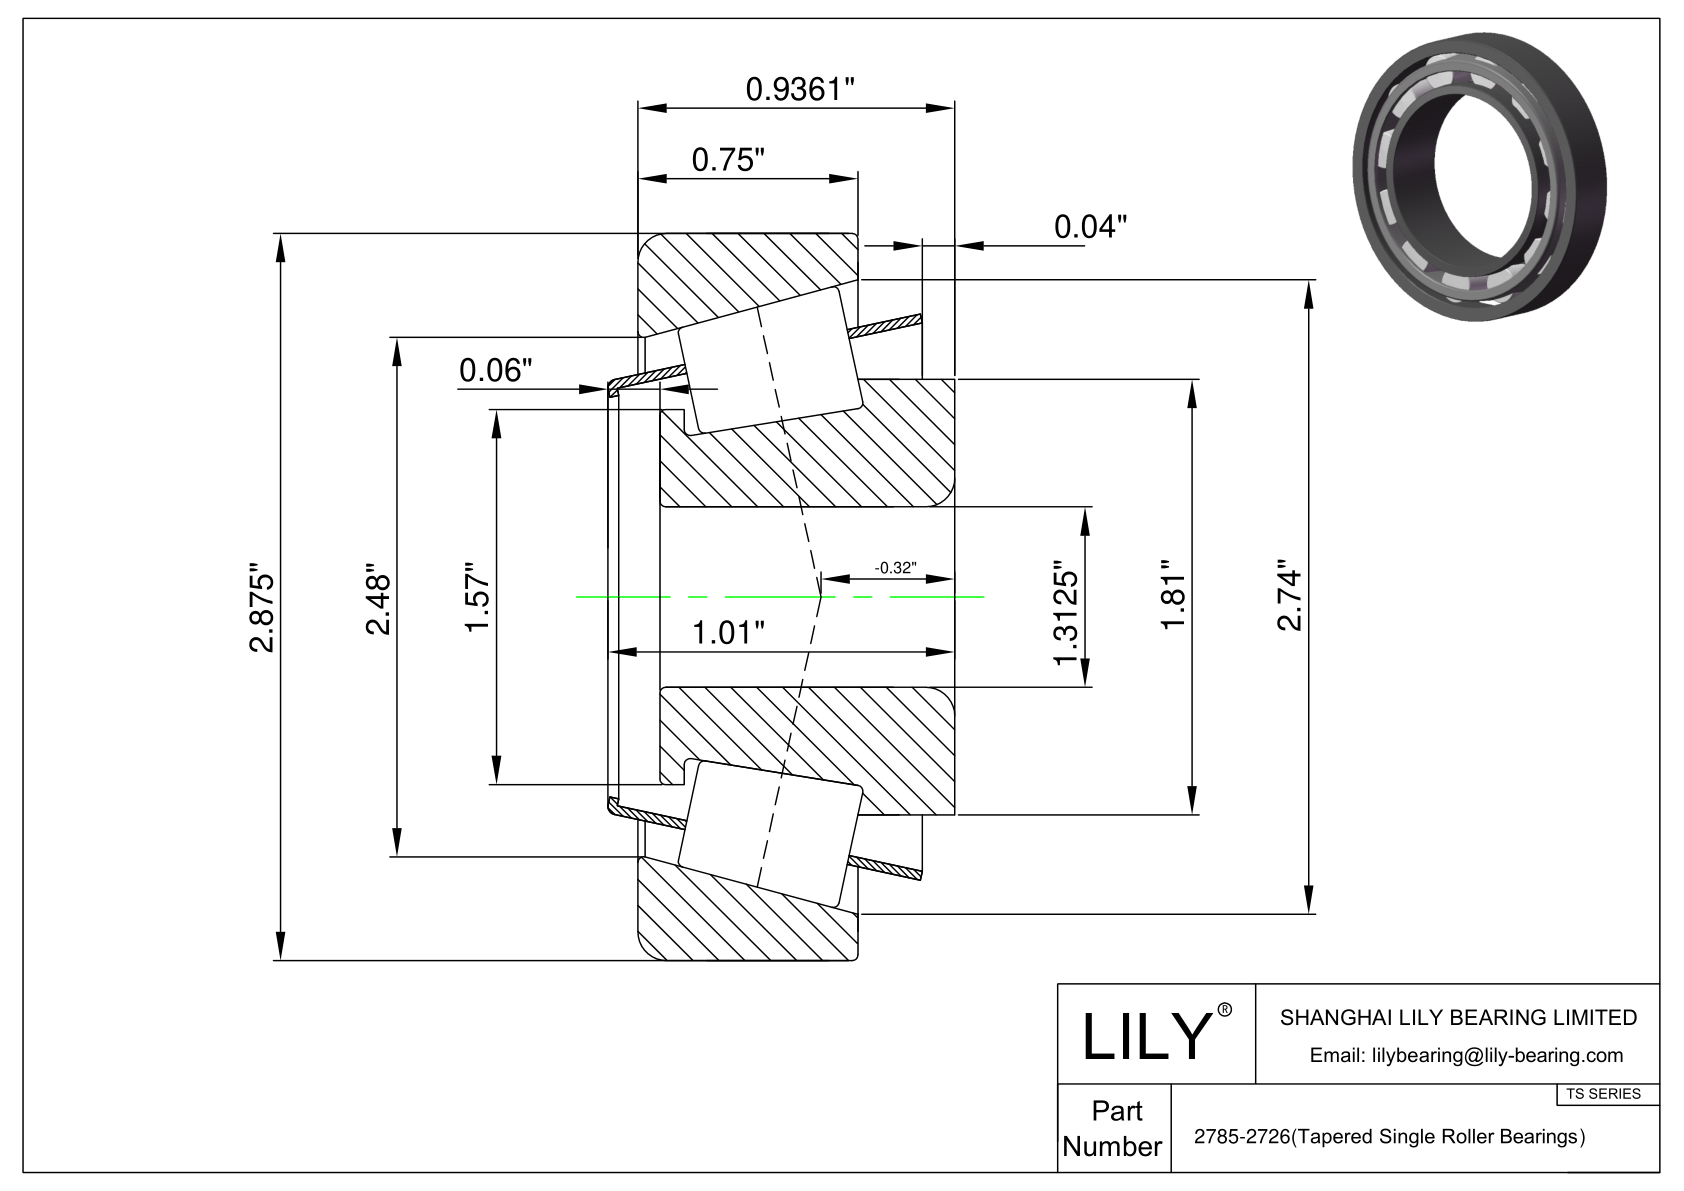 2785-2726 TS (Tapered Single Roller Bearings) (Imperial) cad drawing